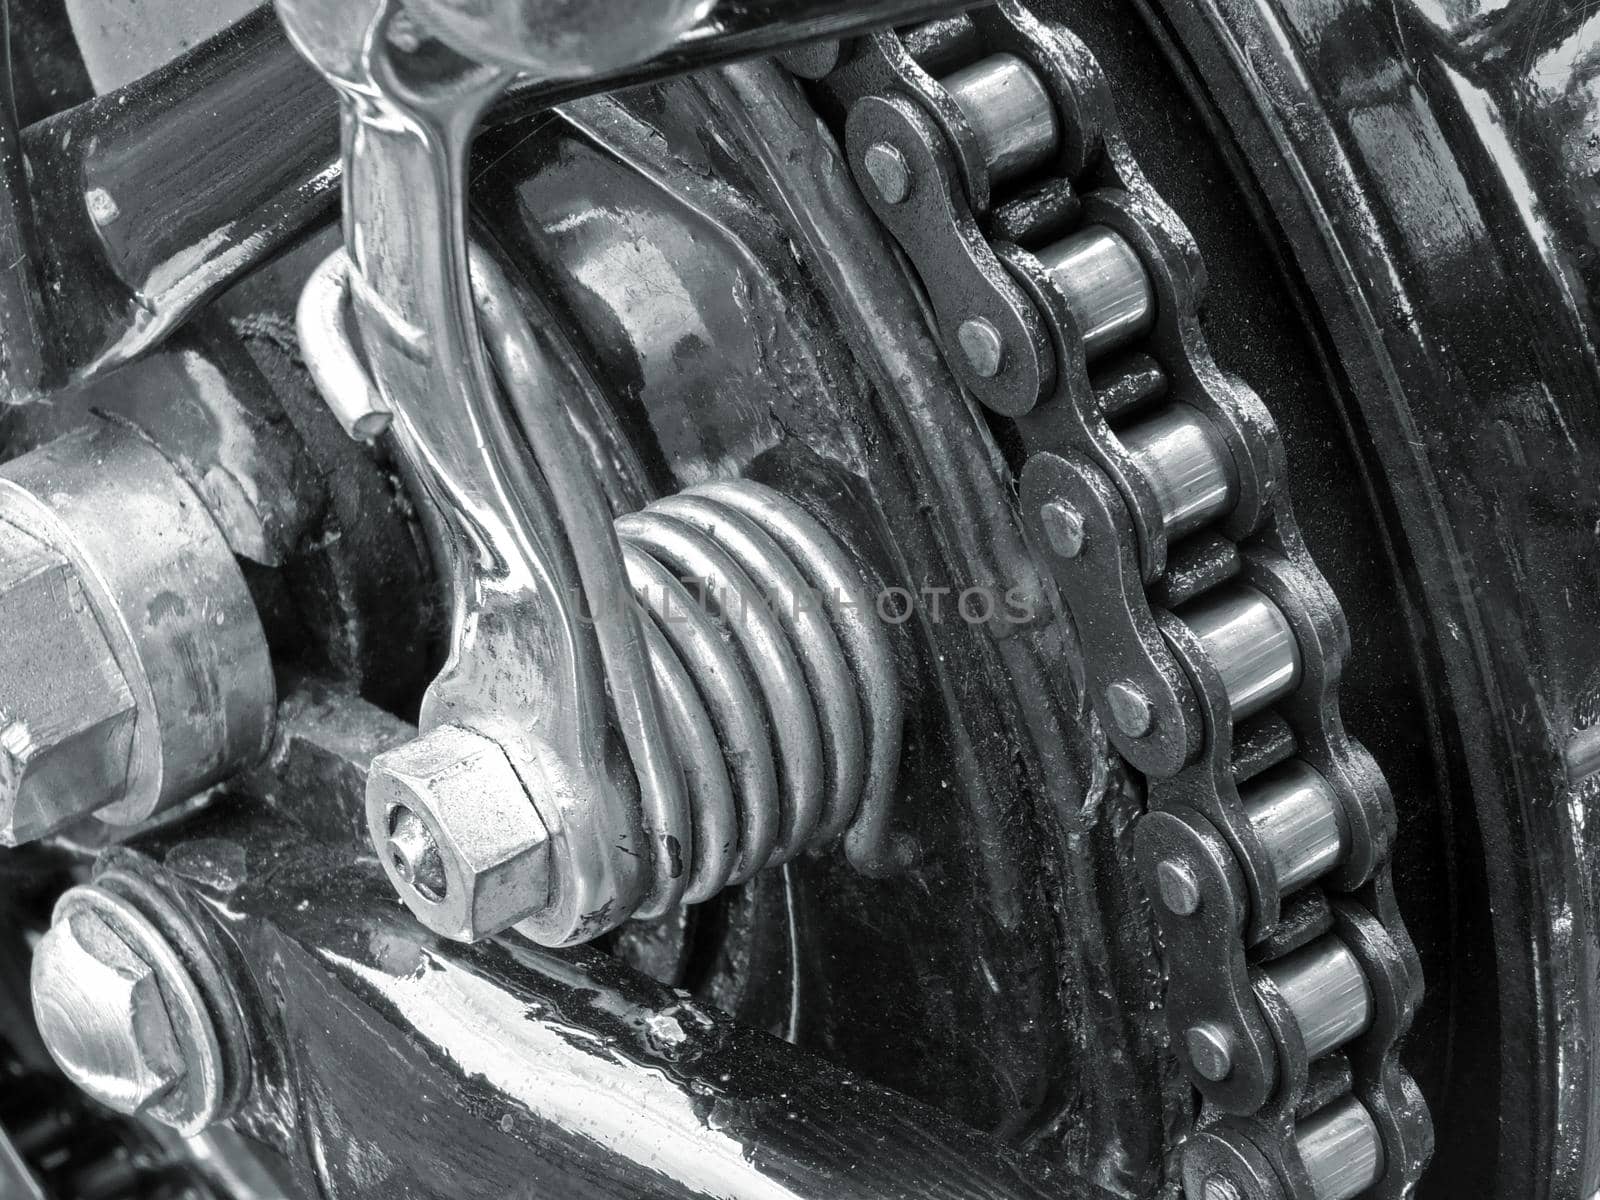 monochrome close up of the drive chain on a black vintage motorbike with chrome fixtures and steel bolts by philopenshaw